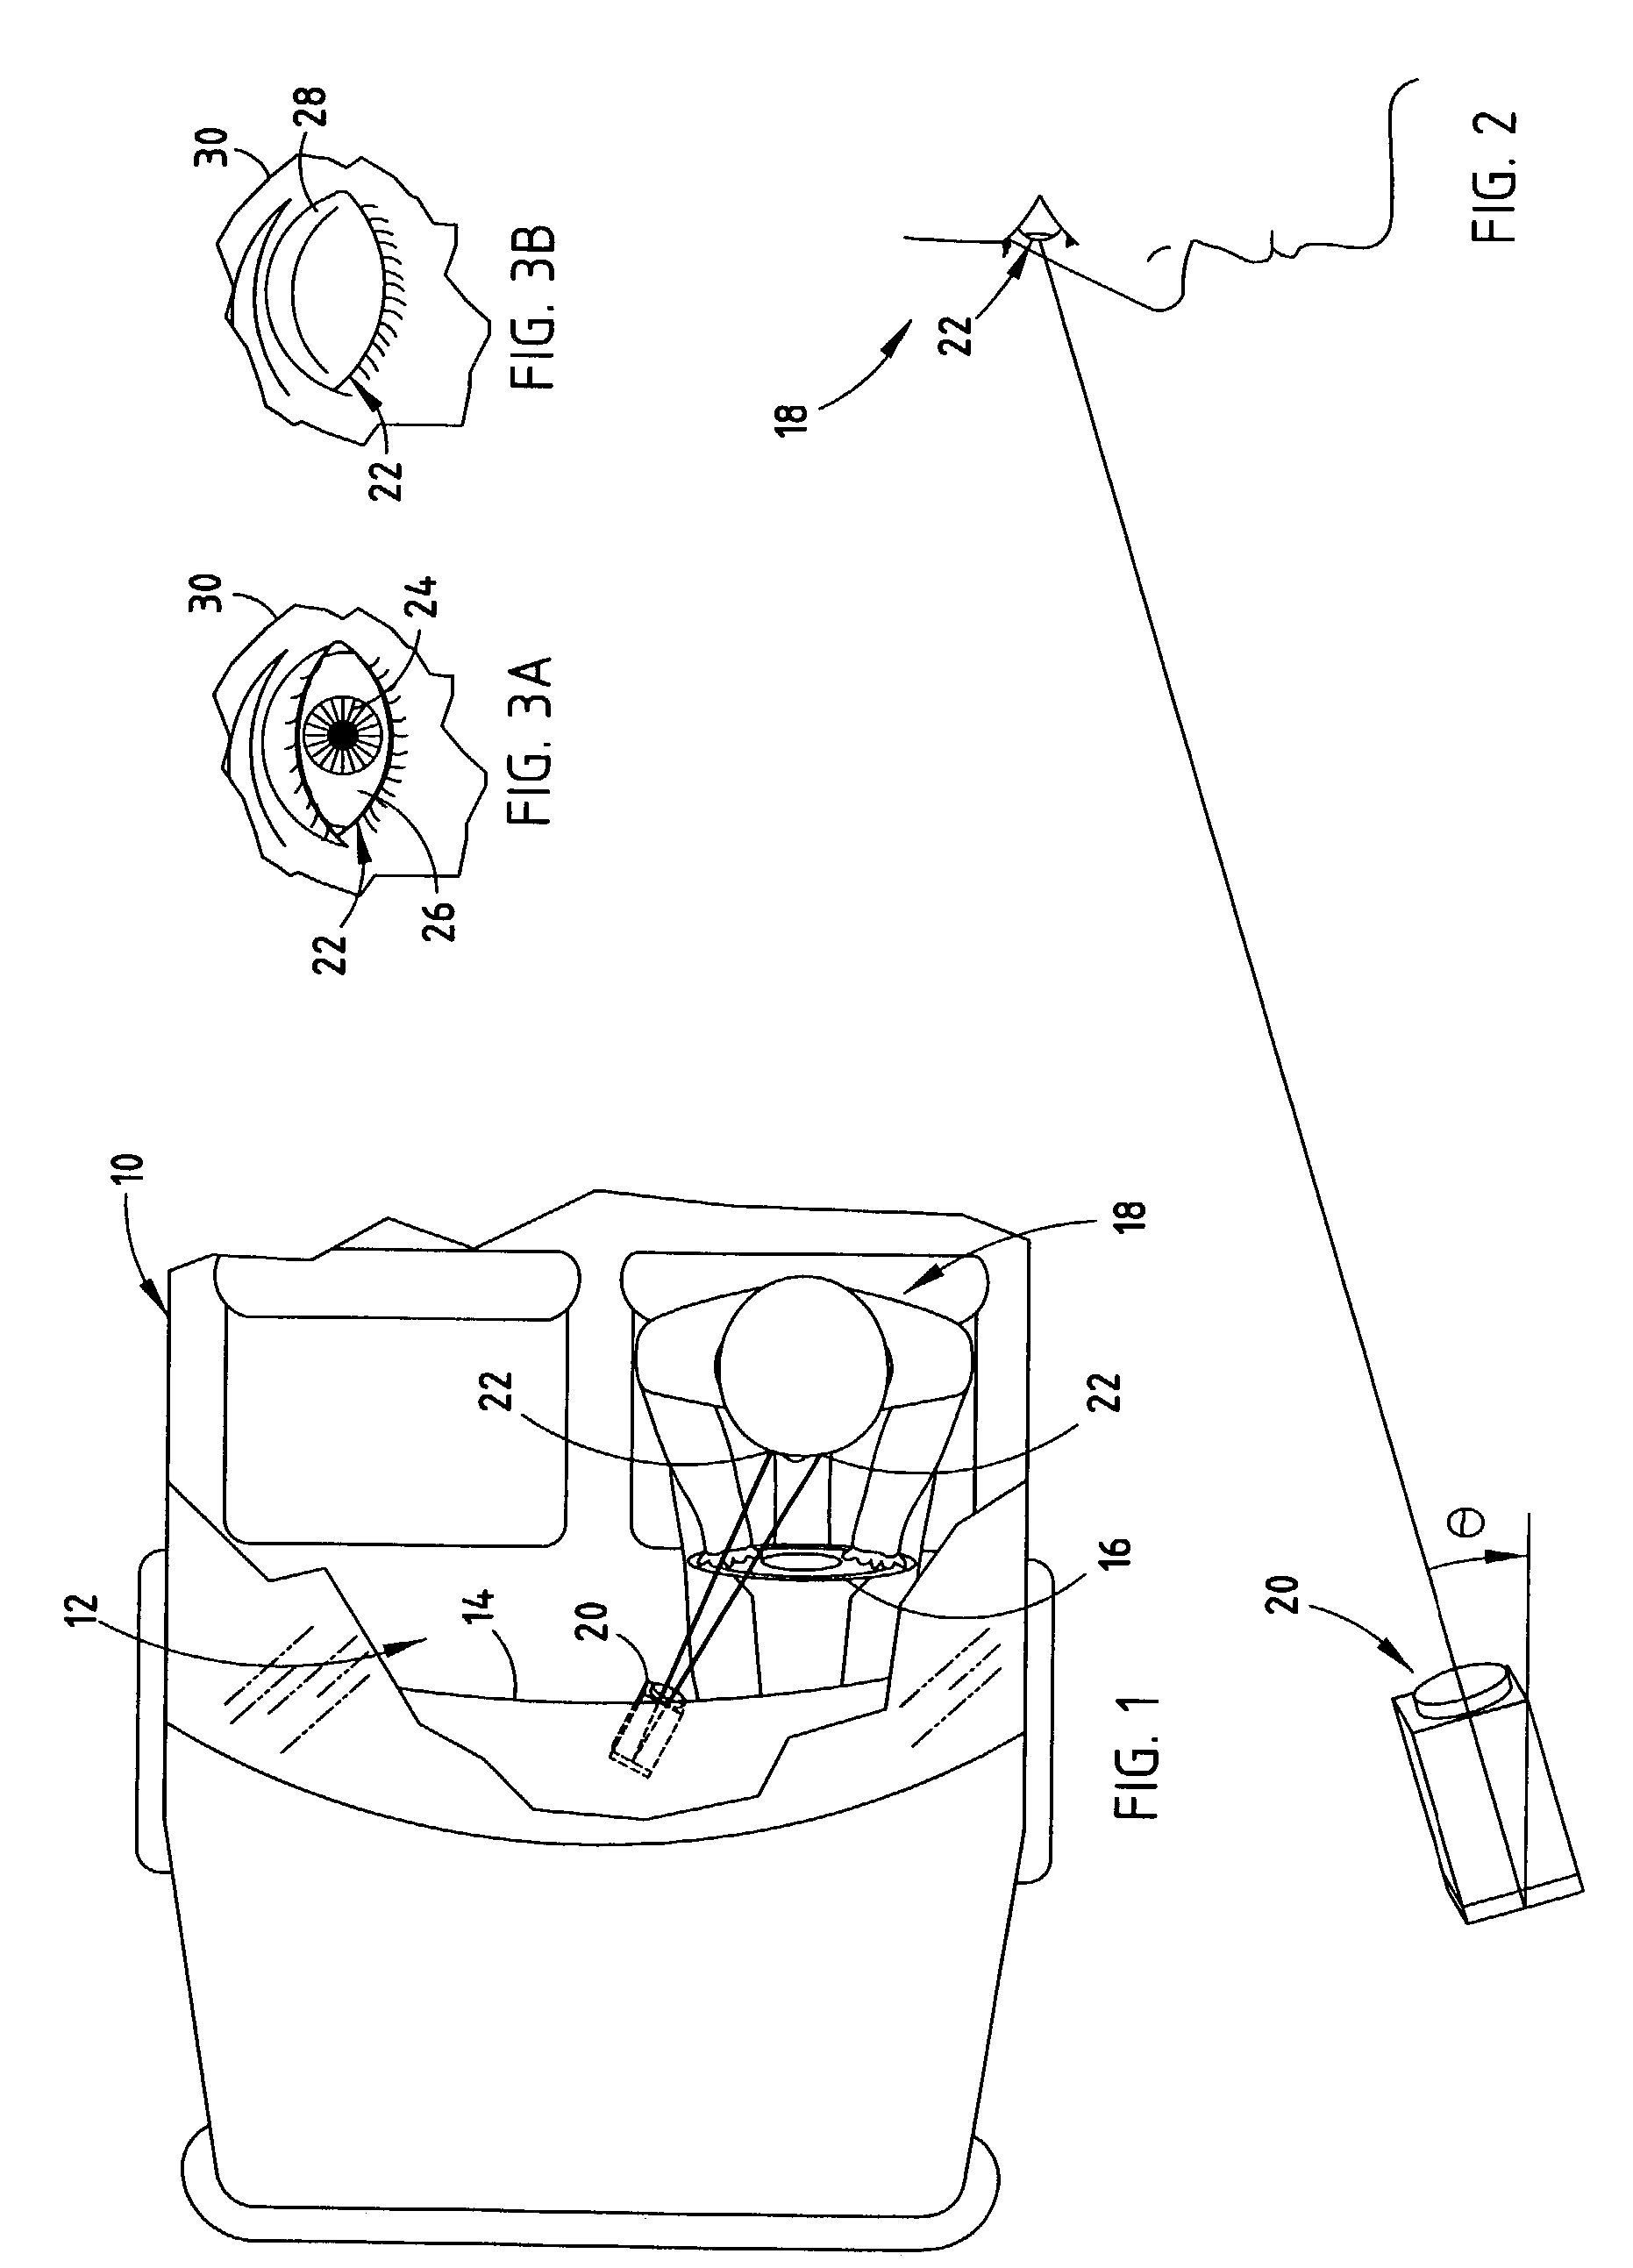 Drowsiness detection system and method